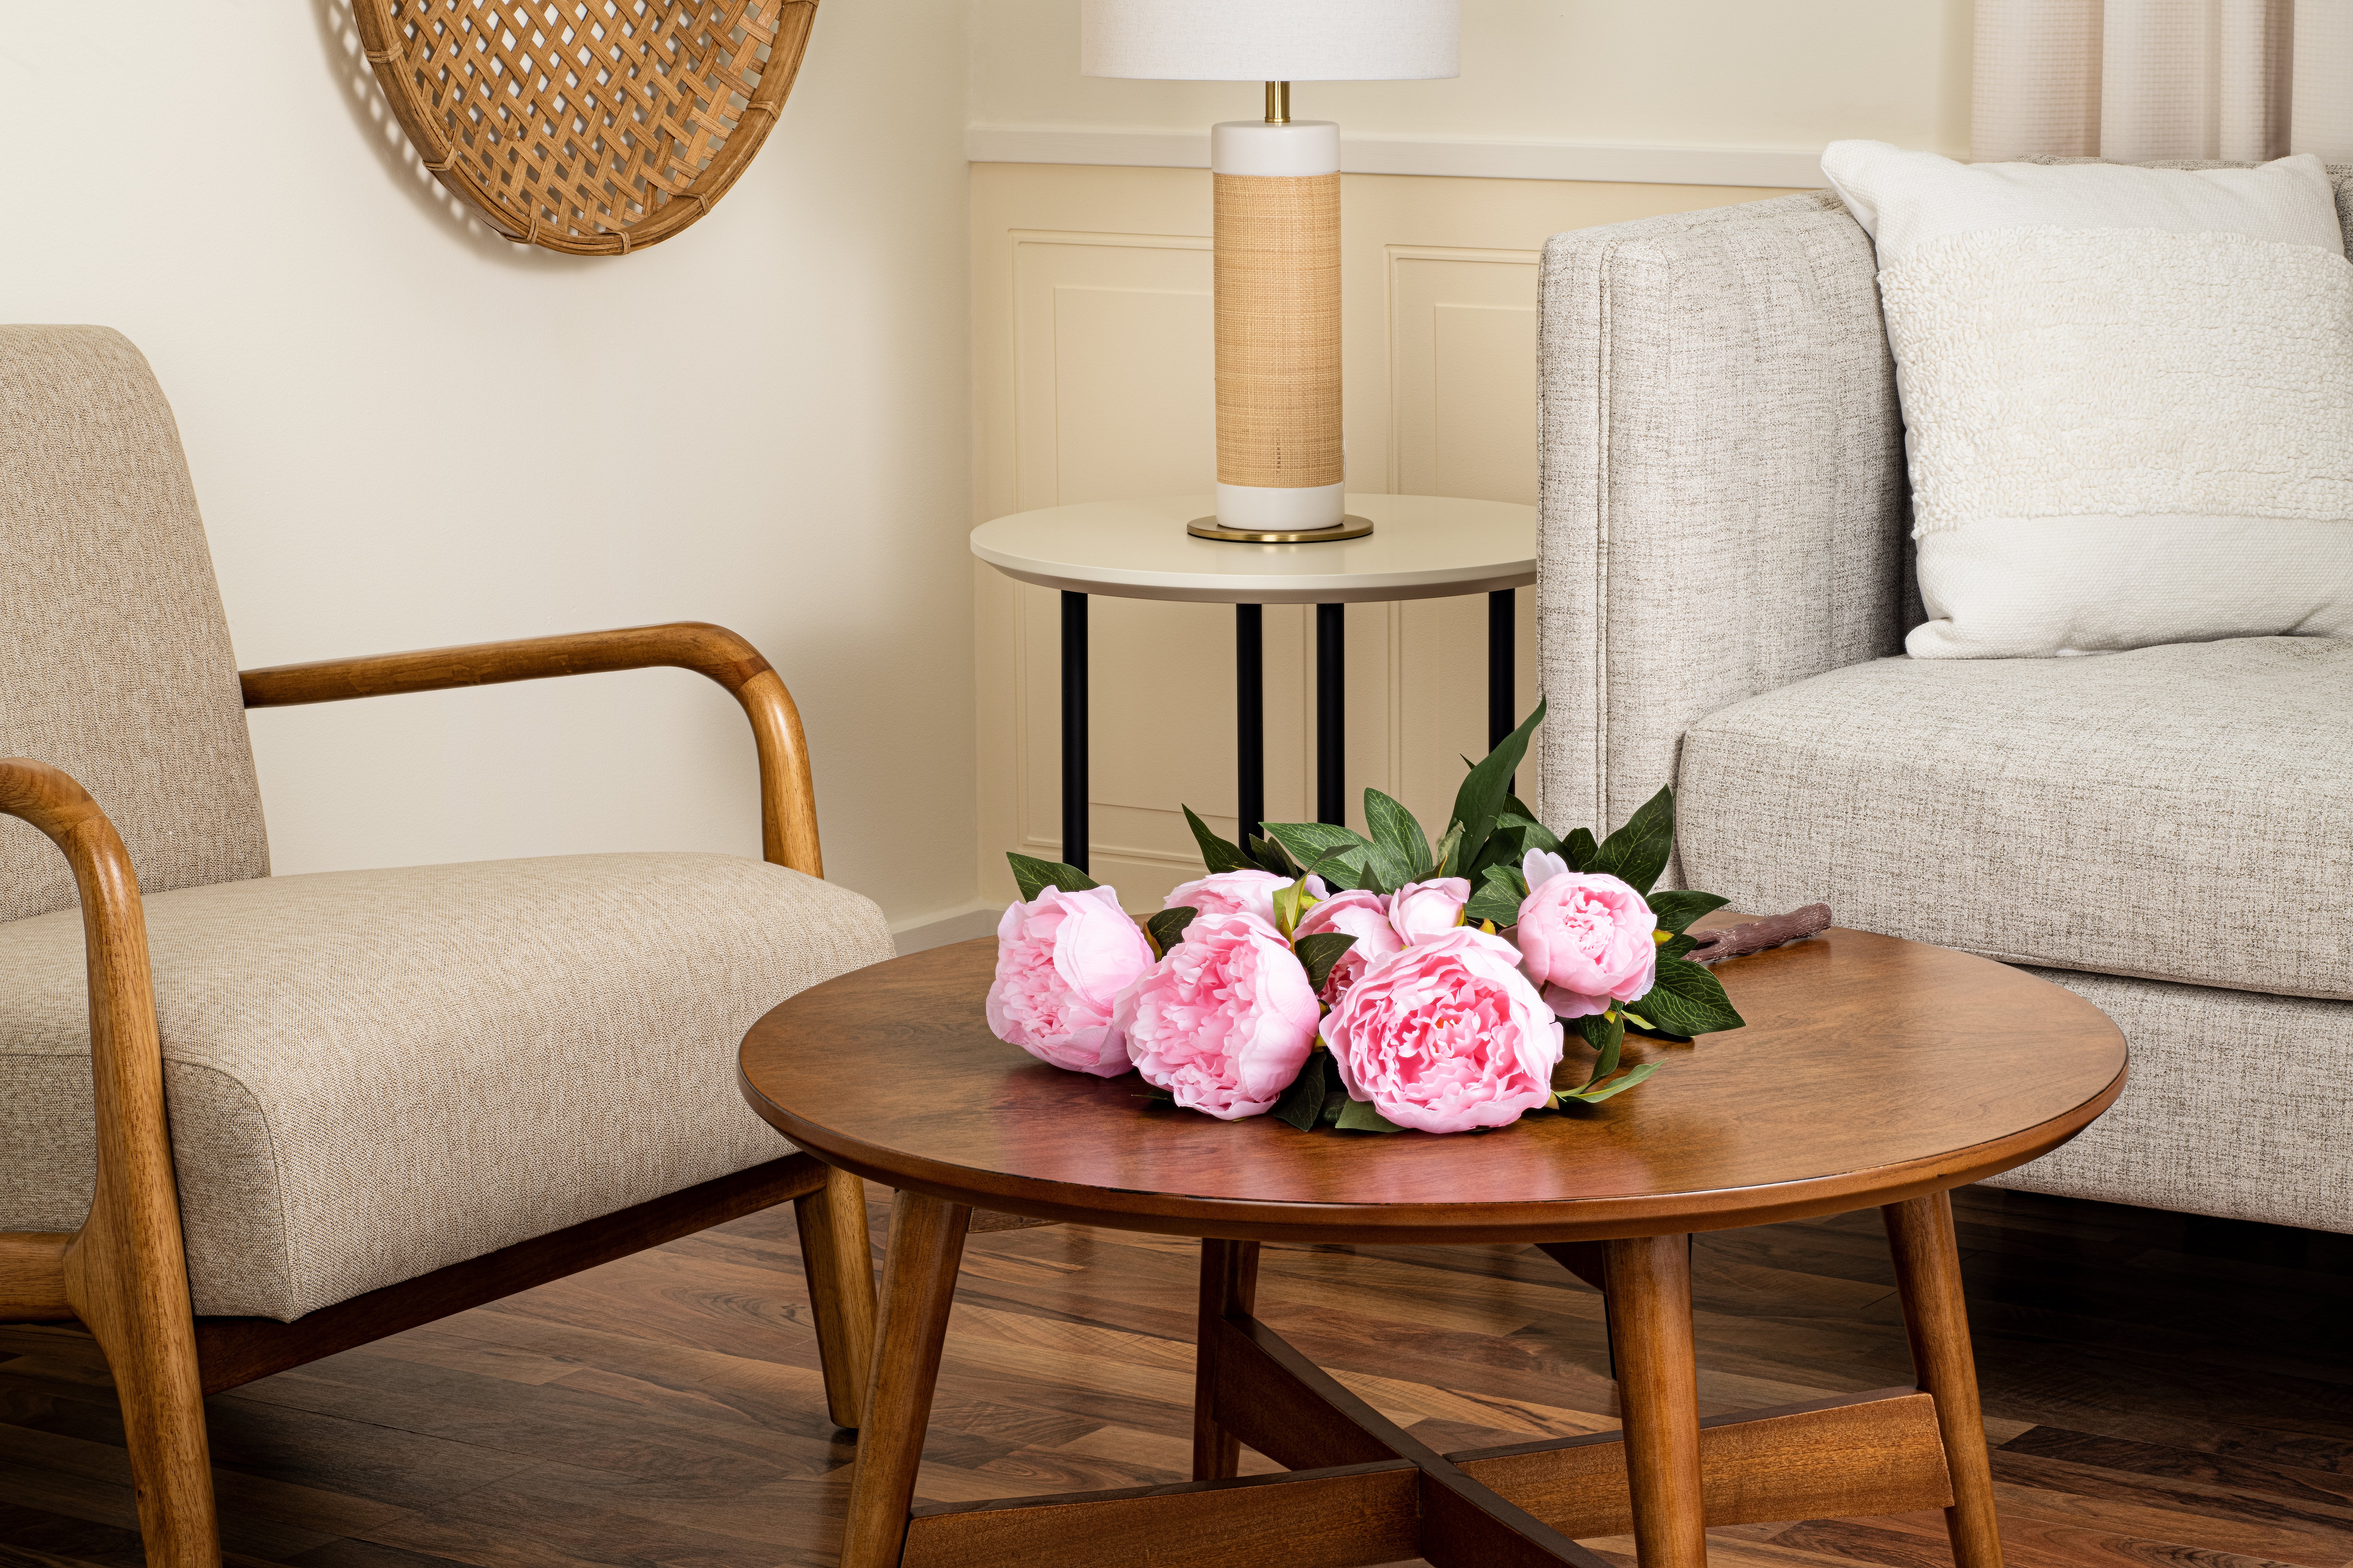 Faux pink flowers lay on wood coffee table in living room